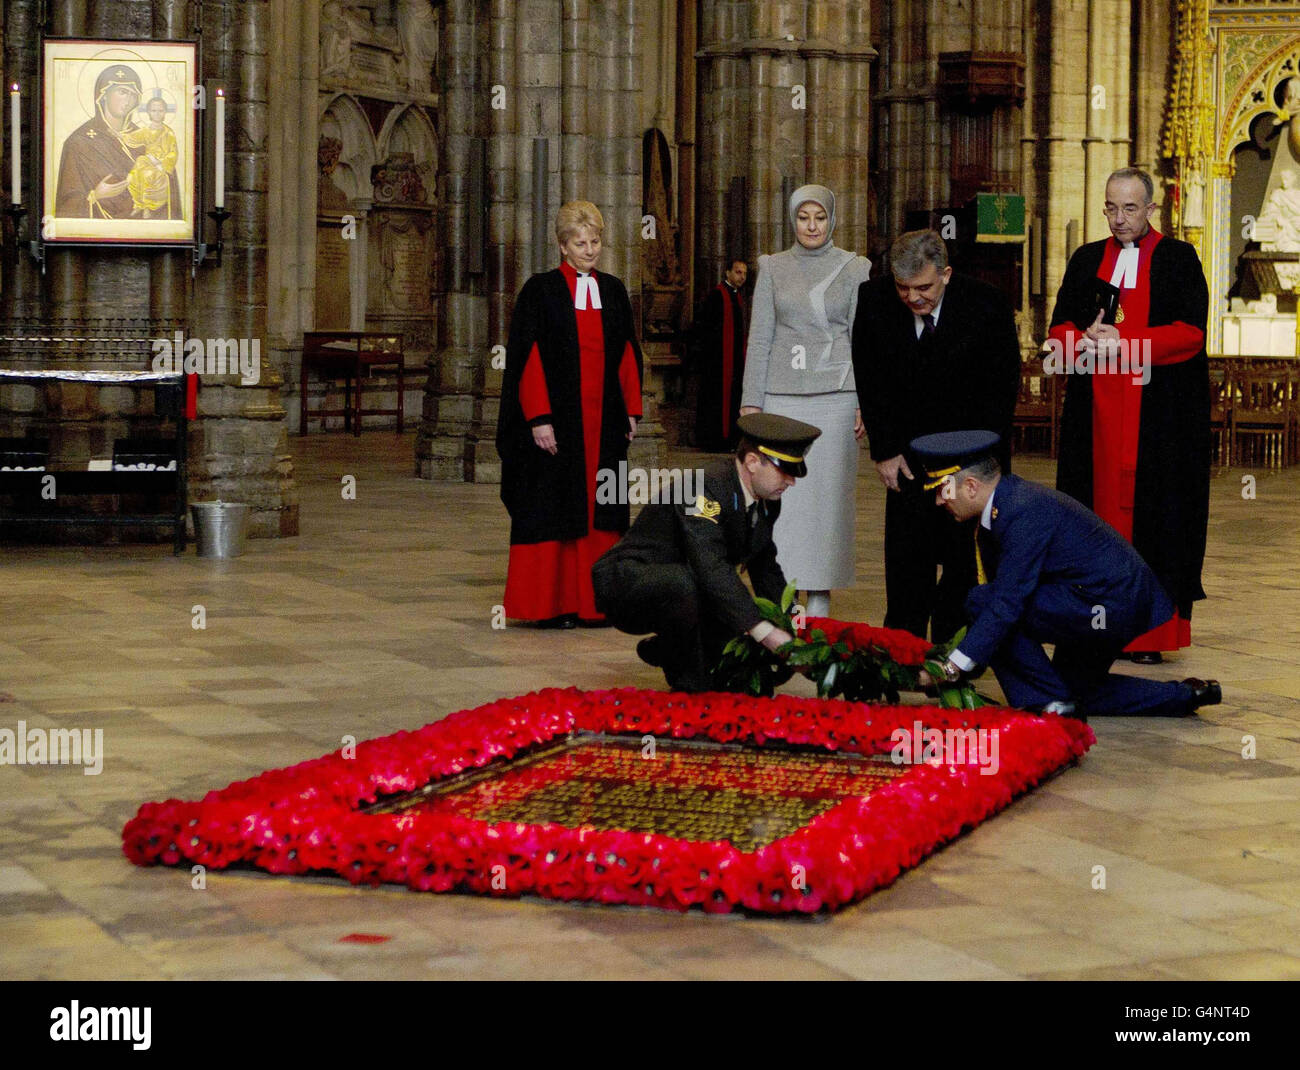 The President of Turkey Abdullah Gul, accompanied by his wife Hayrunnisa, lays a wreath at the Grave of the Unknown Warrior in Westminster Abbey in central London on the first day of his State Visit to the UK. Stock Photo